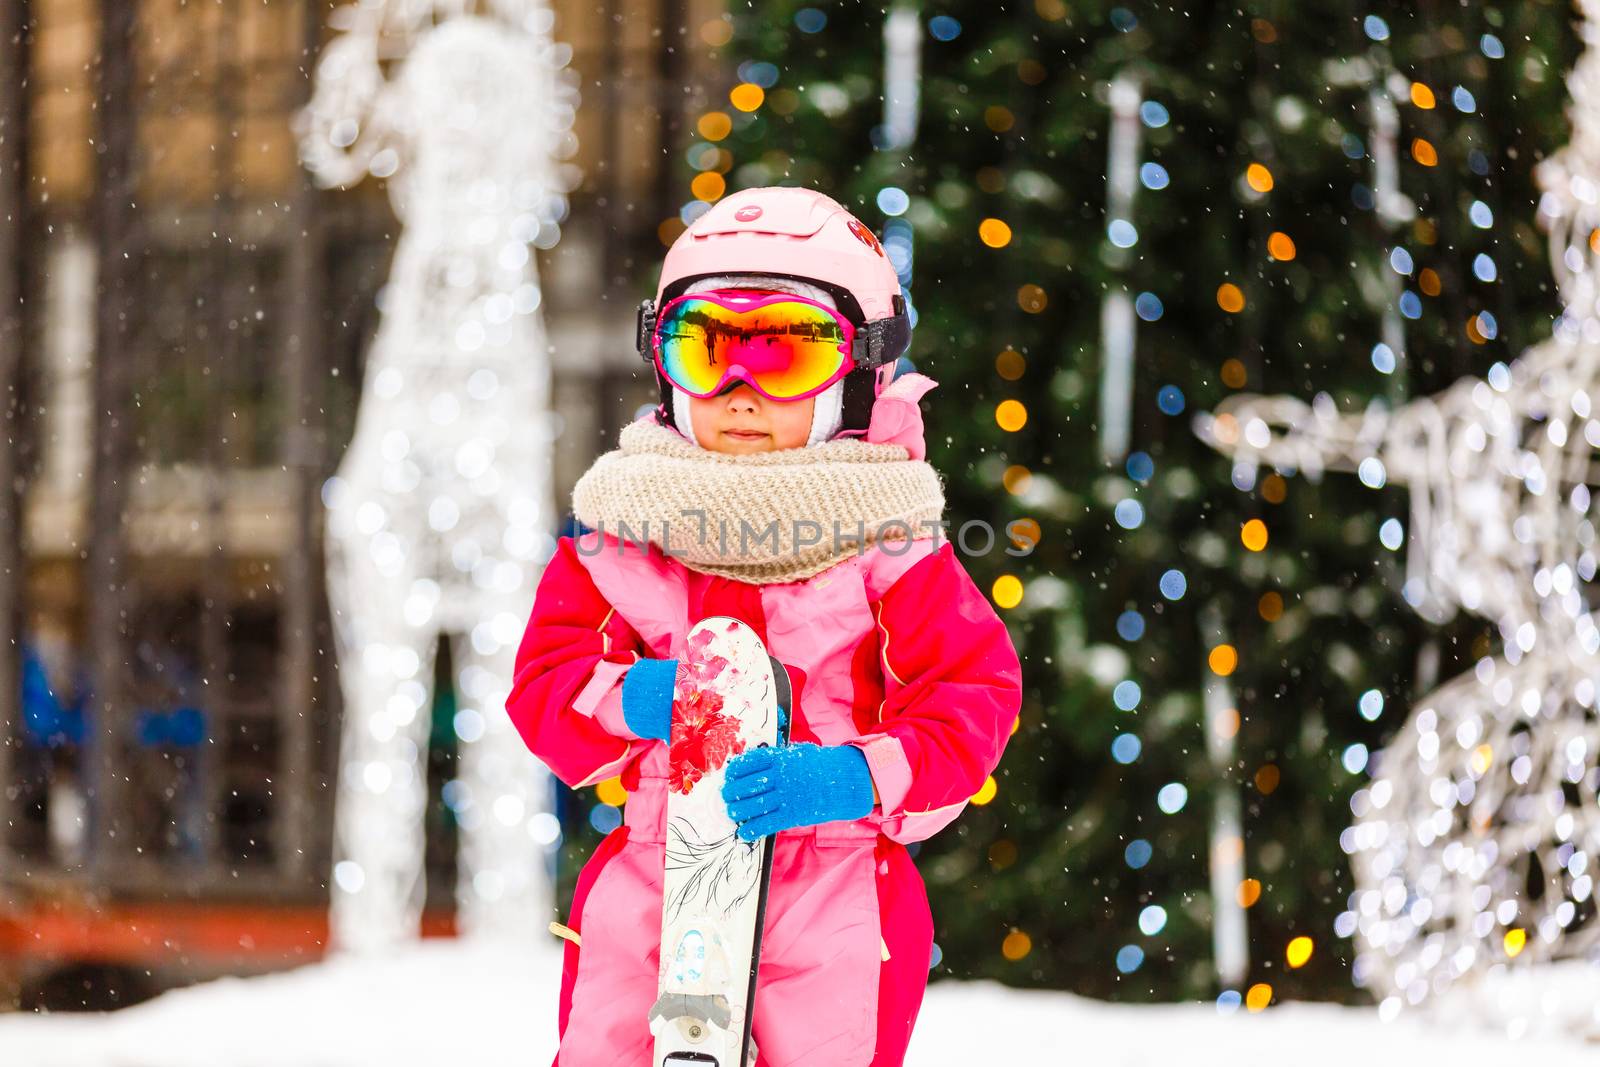 Little girl wearing goggles and helmet on a winter vacation outdoors holding skis behind looking camera smiling excited close-up blurred background